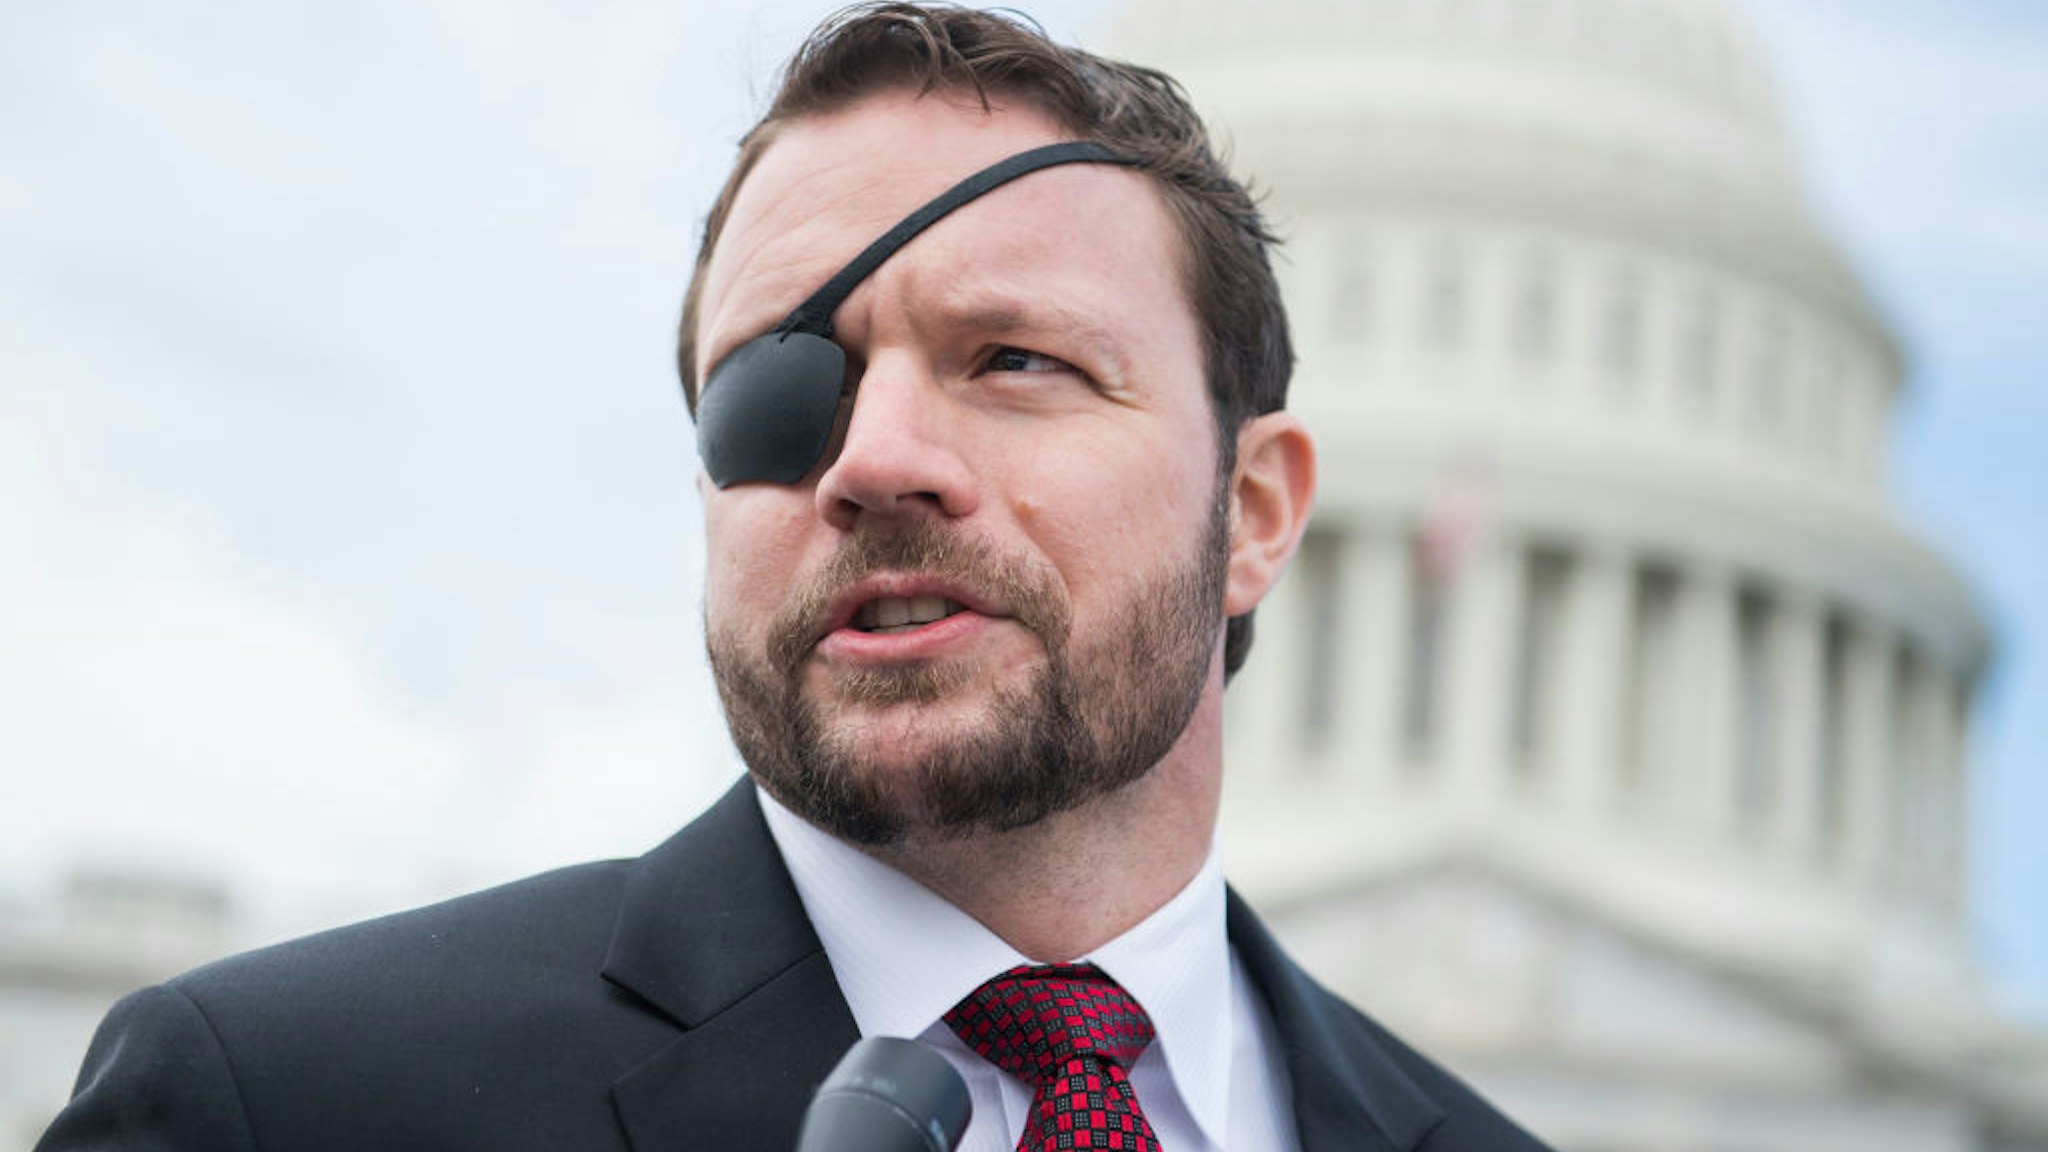 UNITED STATES - NOVEMBER 14: Rep.-elect Dan Crenshaw, R-Texas, is seen after the freshman class photo on the East Front of the Capitol on November 14, 2018. (Photo By Tom Williams/CQ Roll Call)